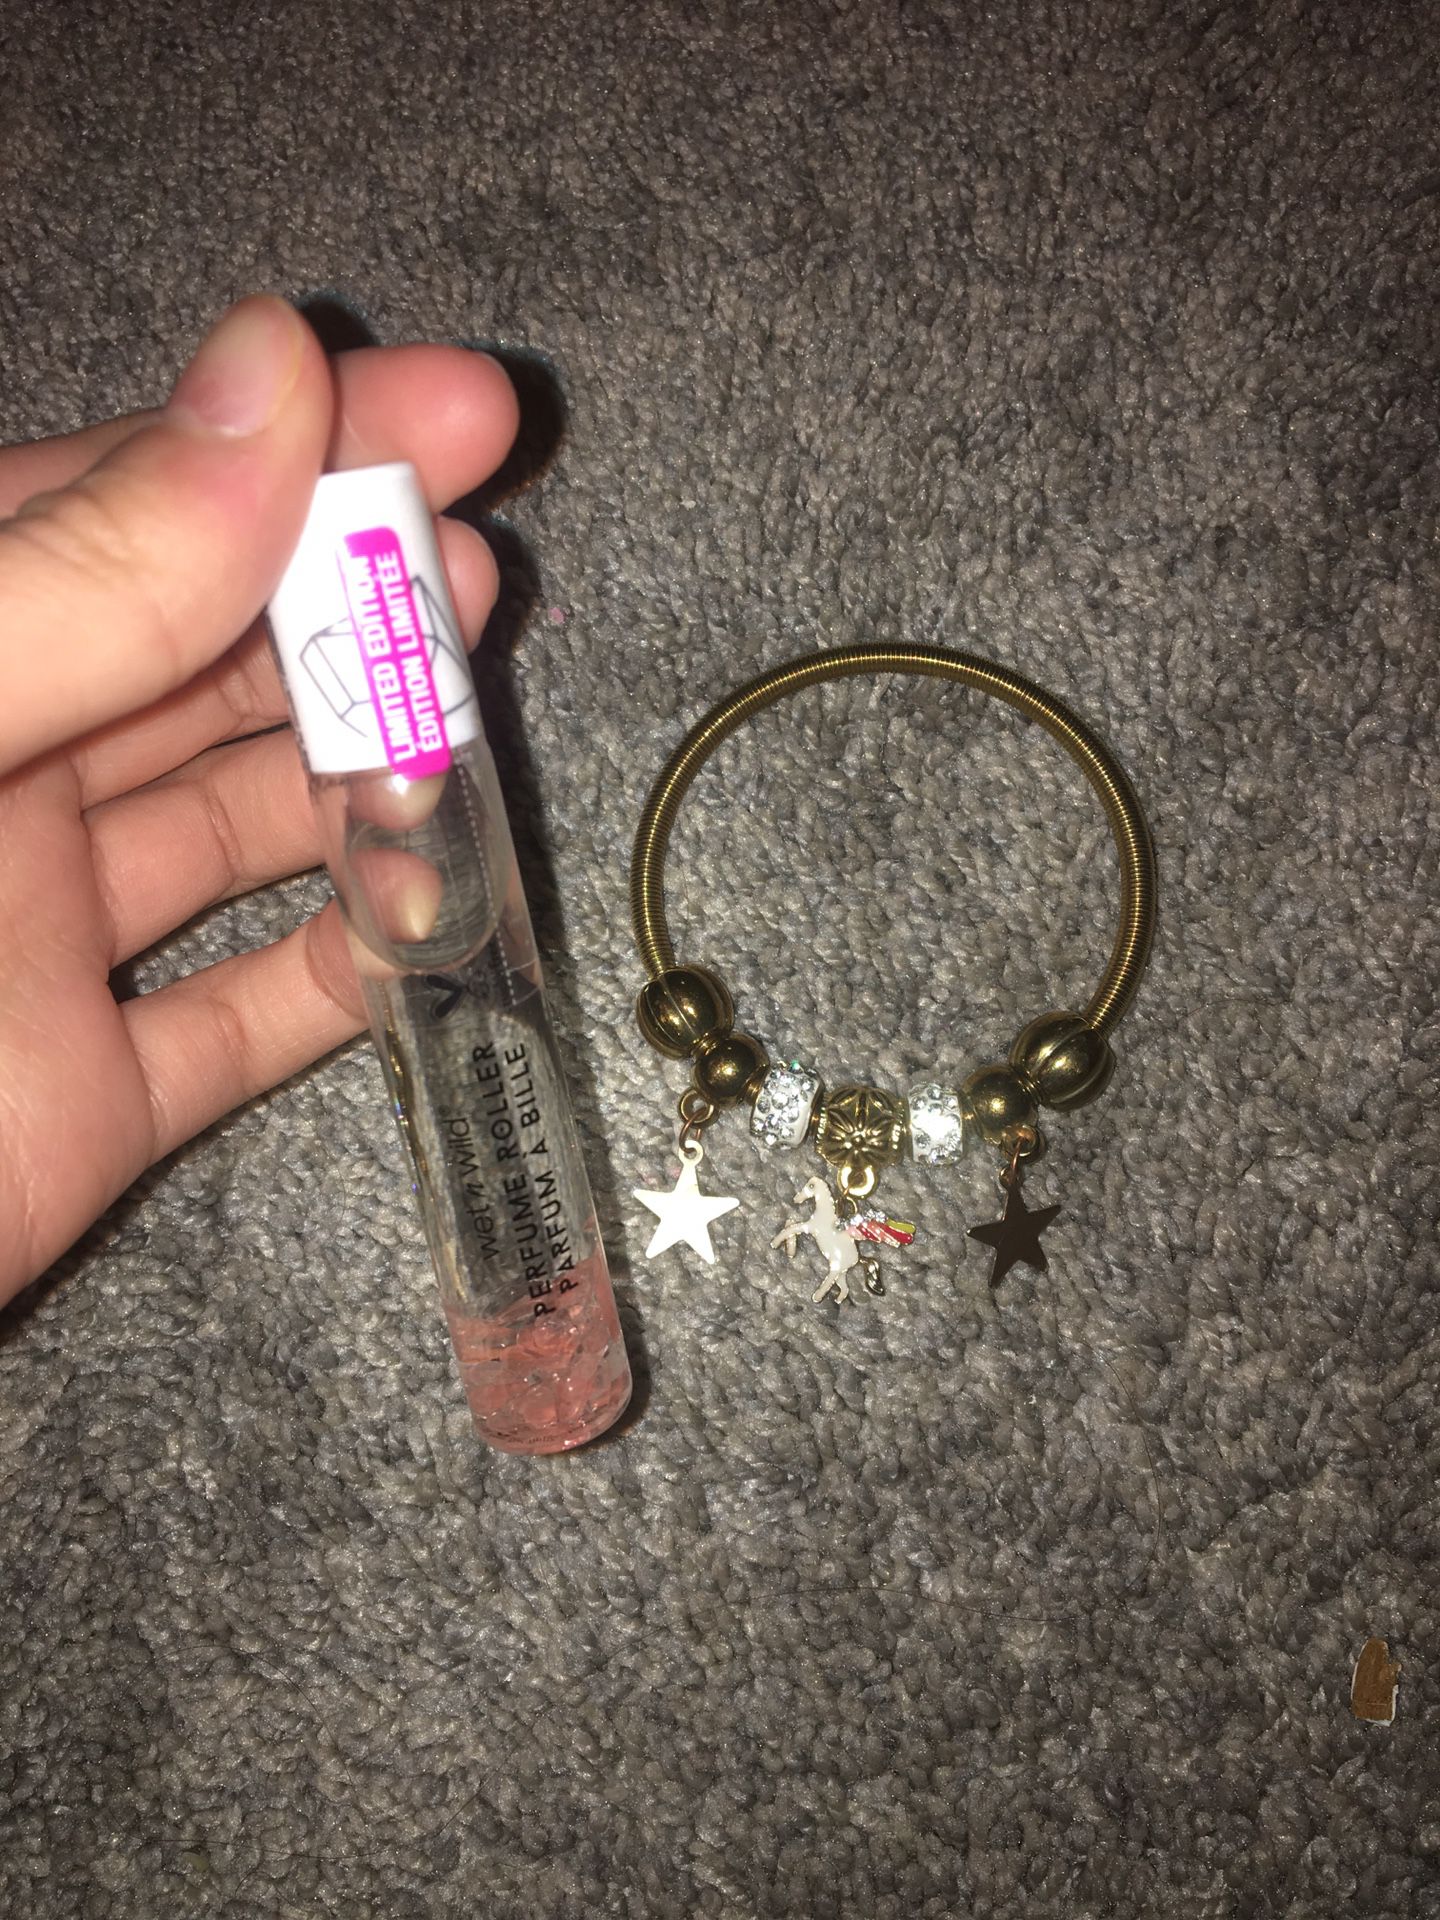 Handmade Charm Bracelet with free gift: limited edition perfume roller